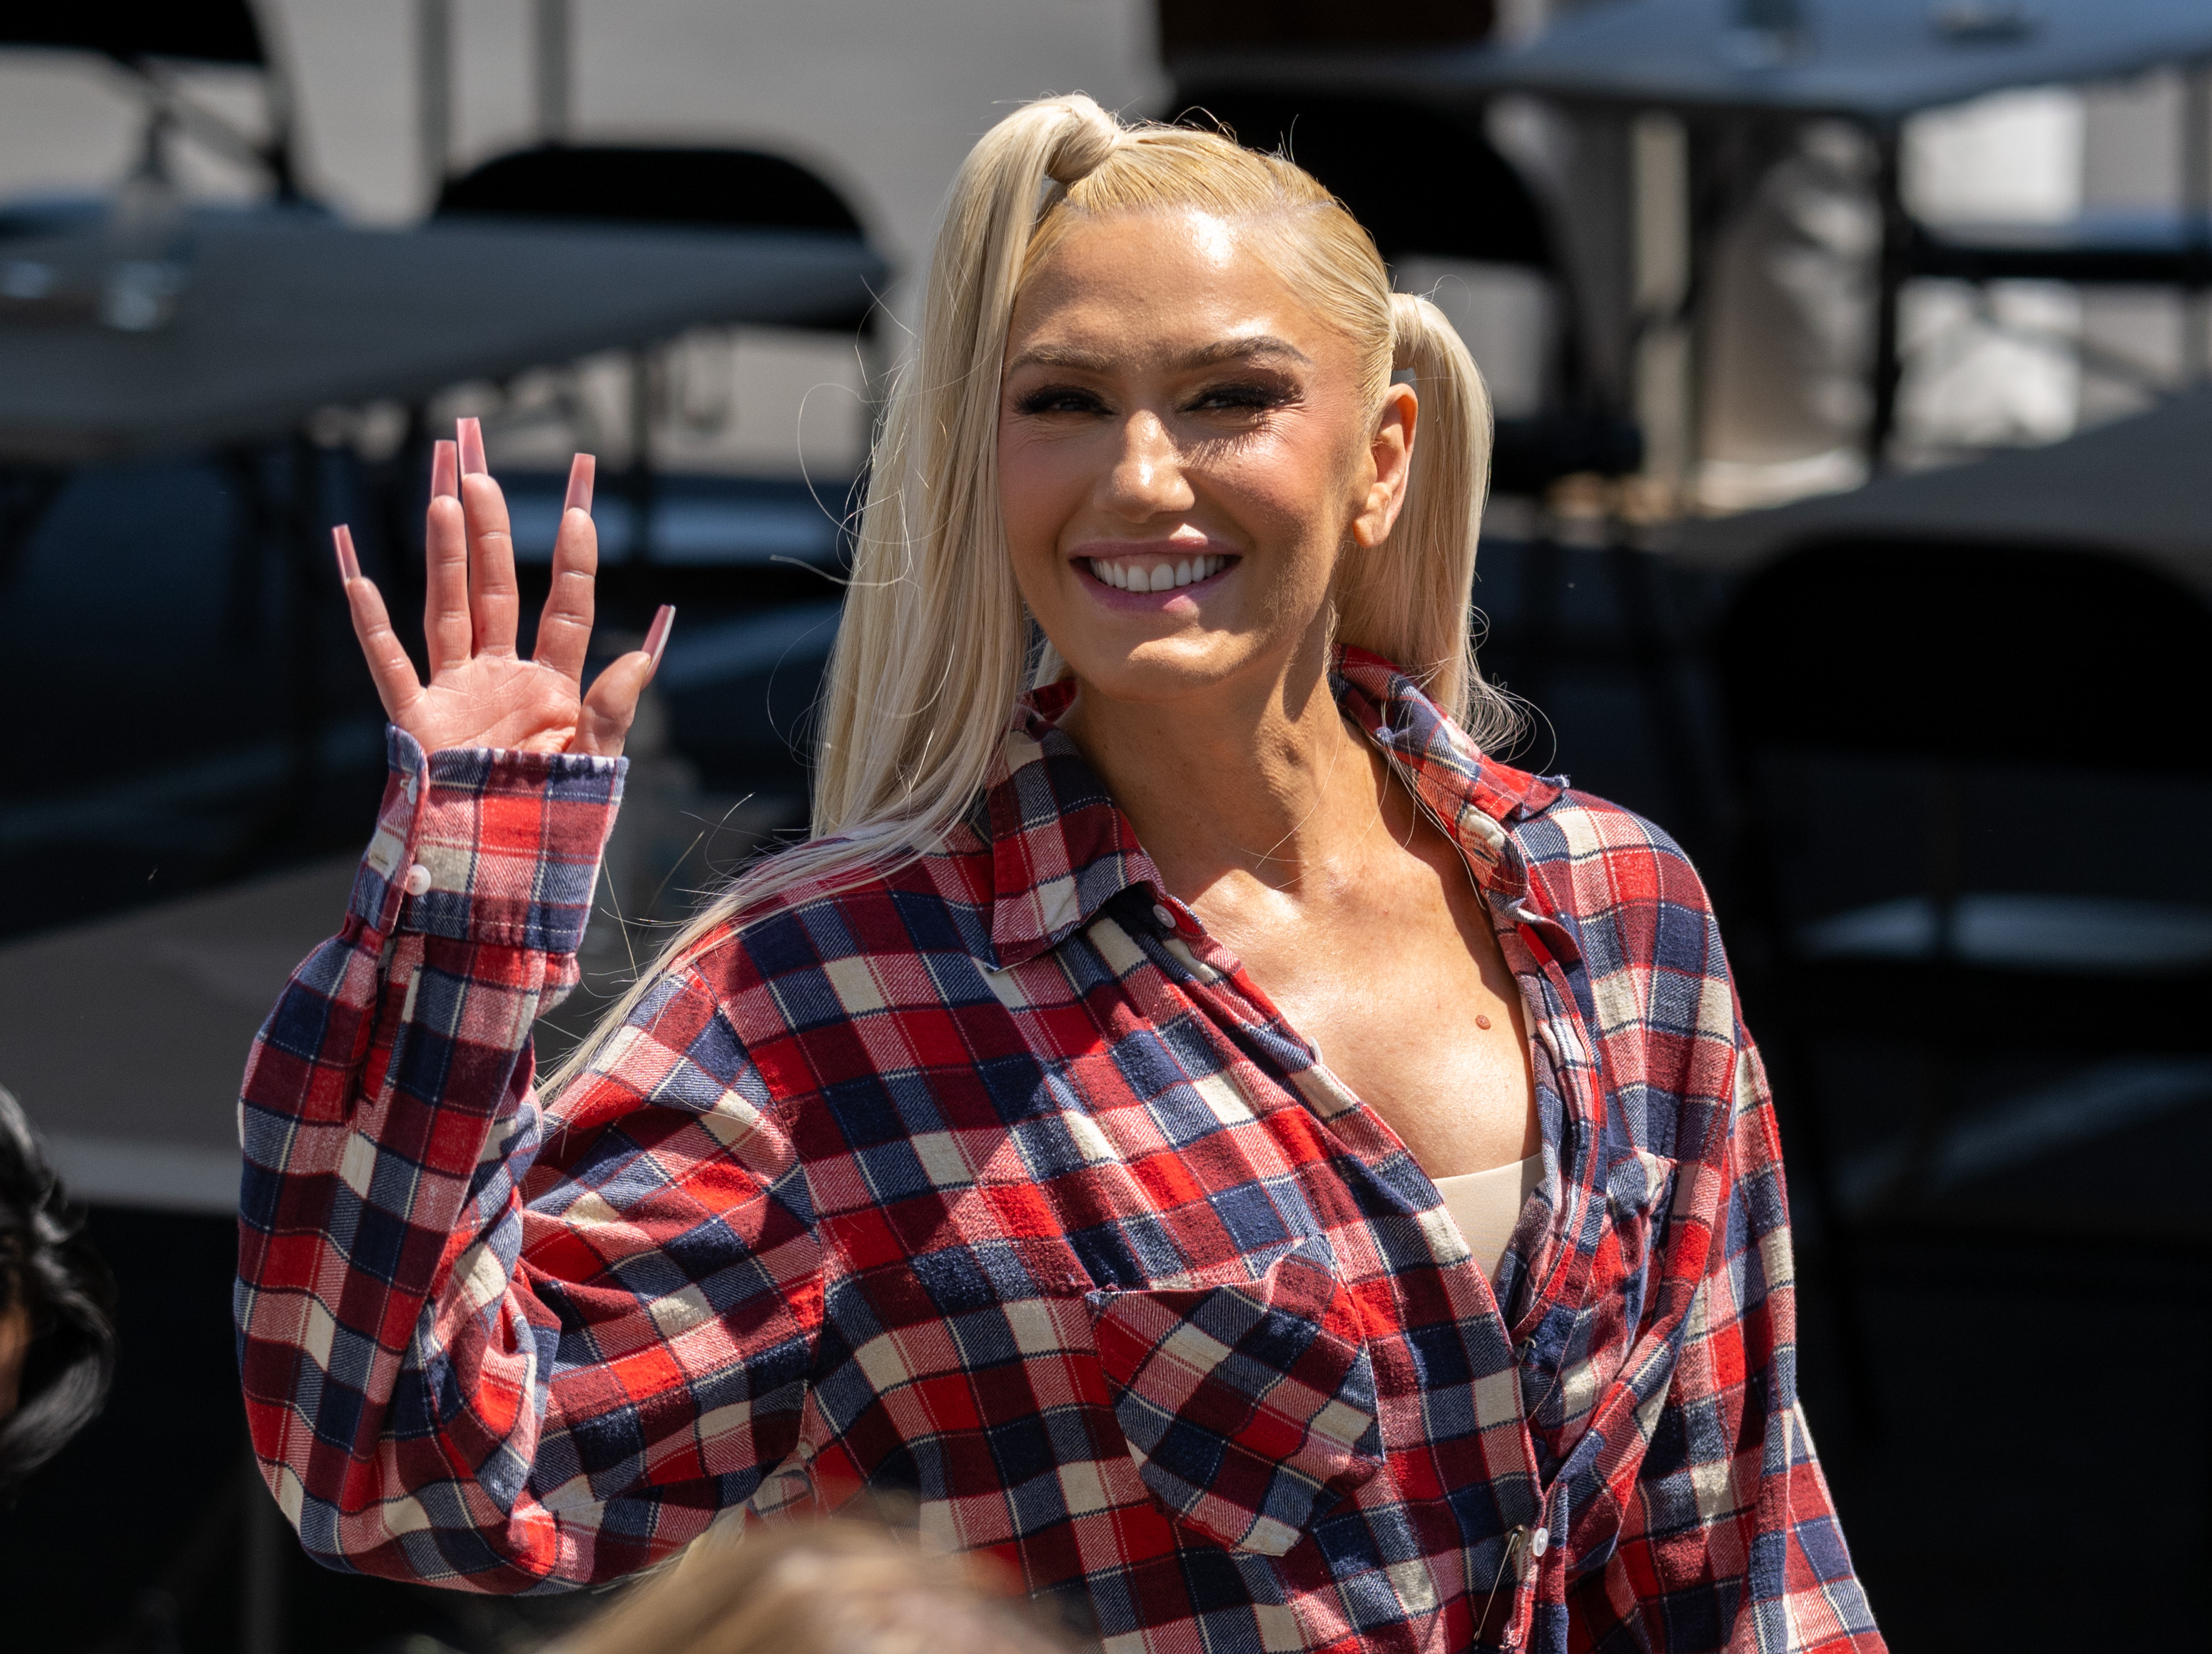 Gwen Stefani seen at "Jimmy Kimmel Live" on July 13, 2022, in Los Angeles, California | Source: Getty Images